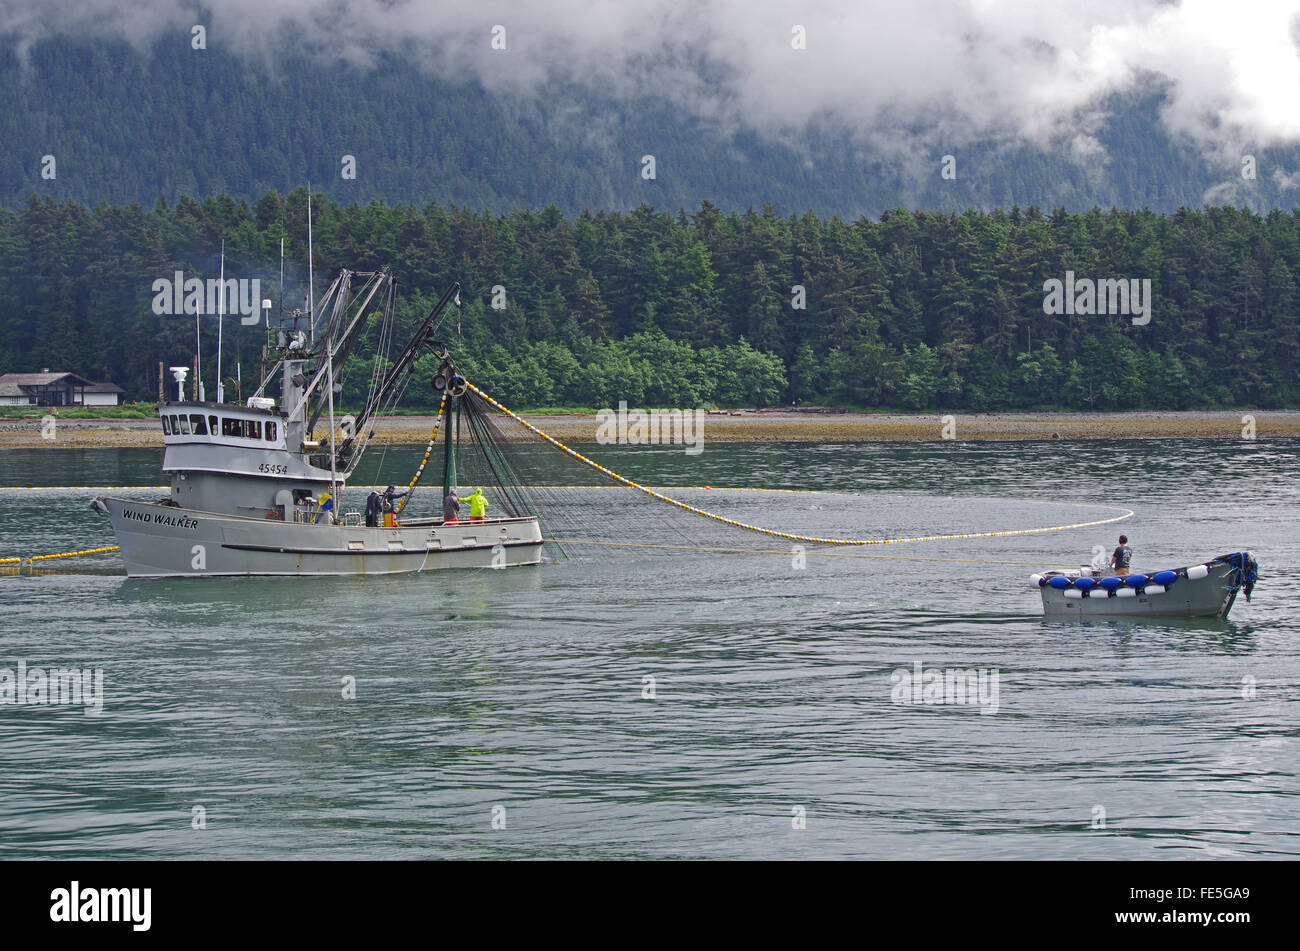 Fishing boat setting a seine net fishing for Salmon off of the